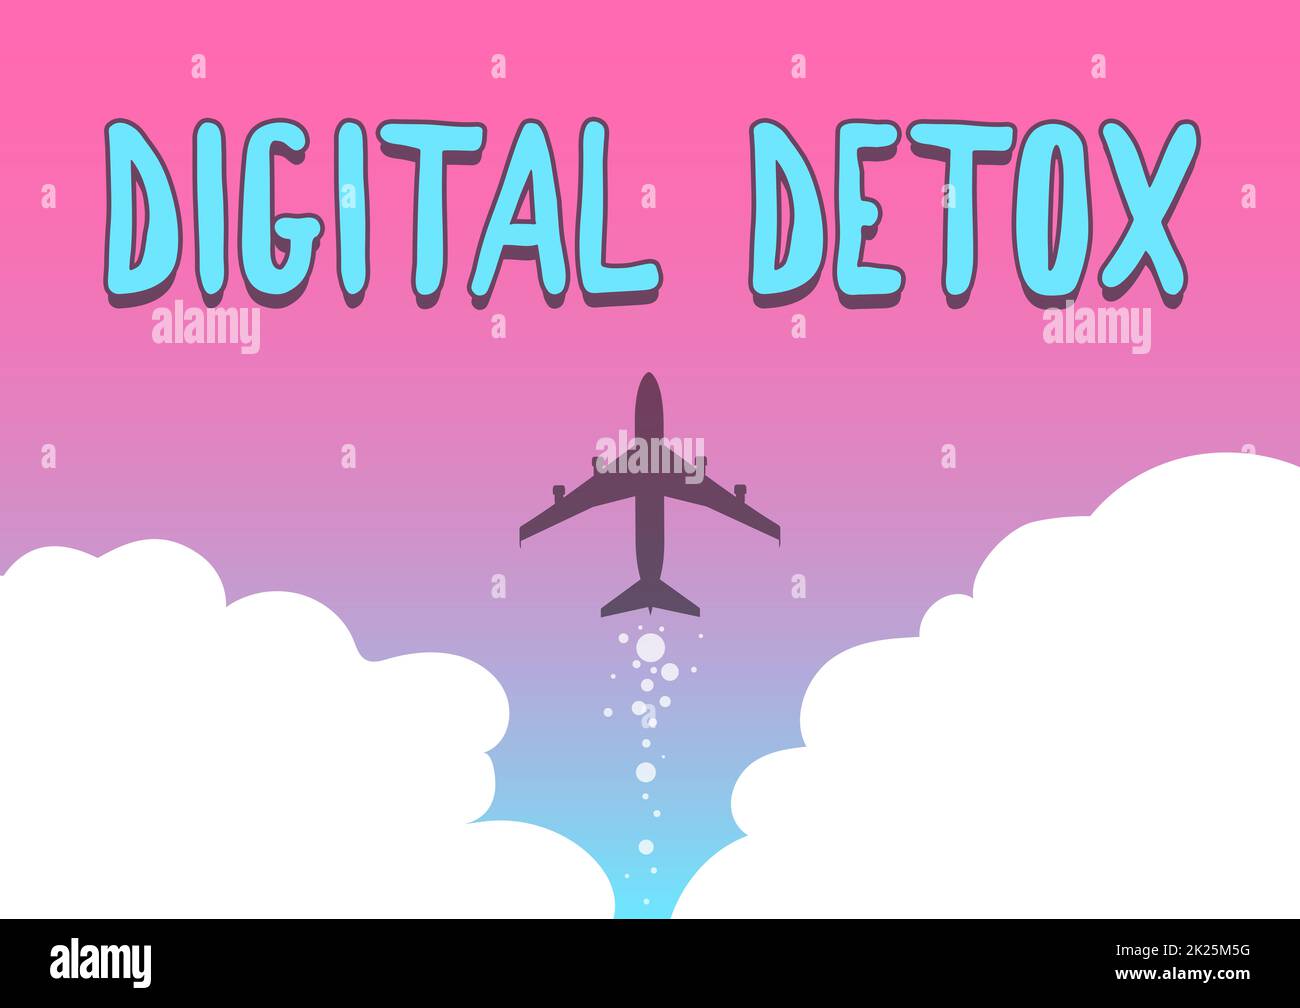 Sign displaying Digital Detox. Internet Concept Free of Electronic Devices Disconnect to Reconnect Unplugged Illustration Of Airplane Launching Fast Straight Up To The Skies. Stock Photo